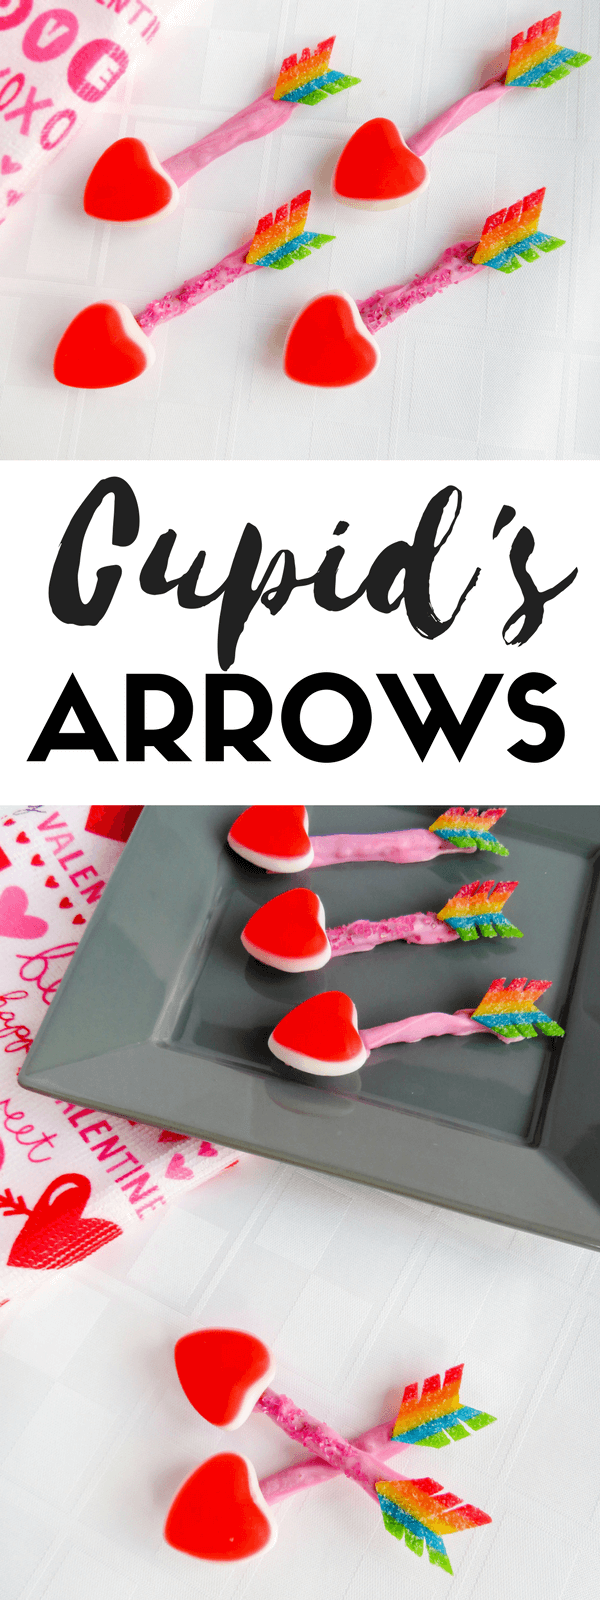 Looking for an easy Valentine's Day dessert? Made from pretzel sticks, gummies, and sour candy, these super cute Cupid's Arrow treats are just the thing!